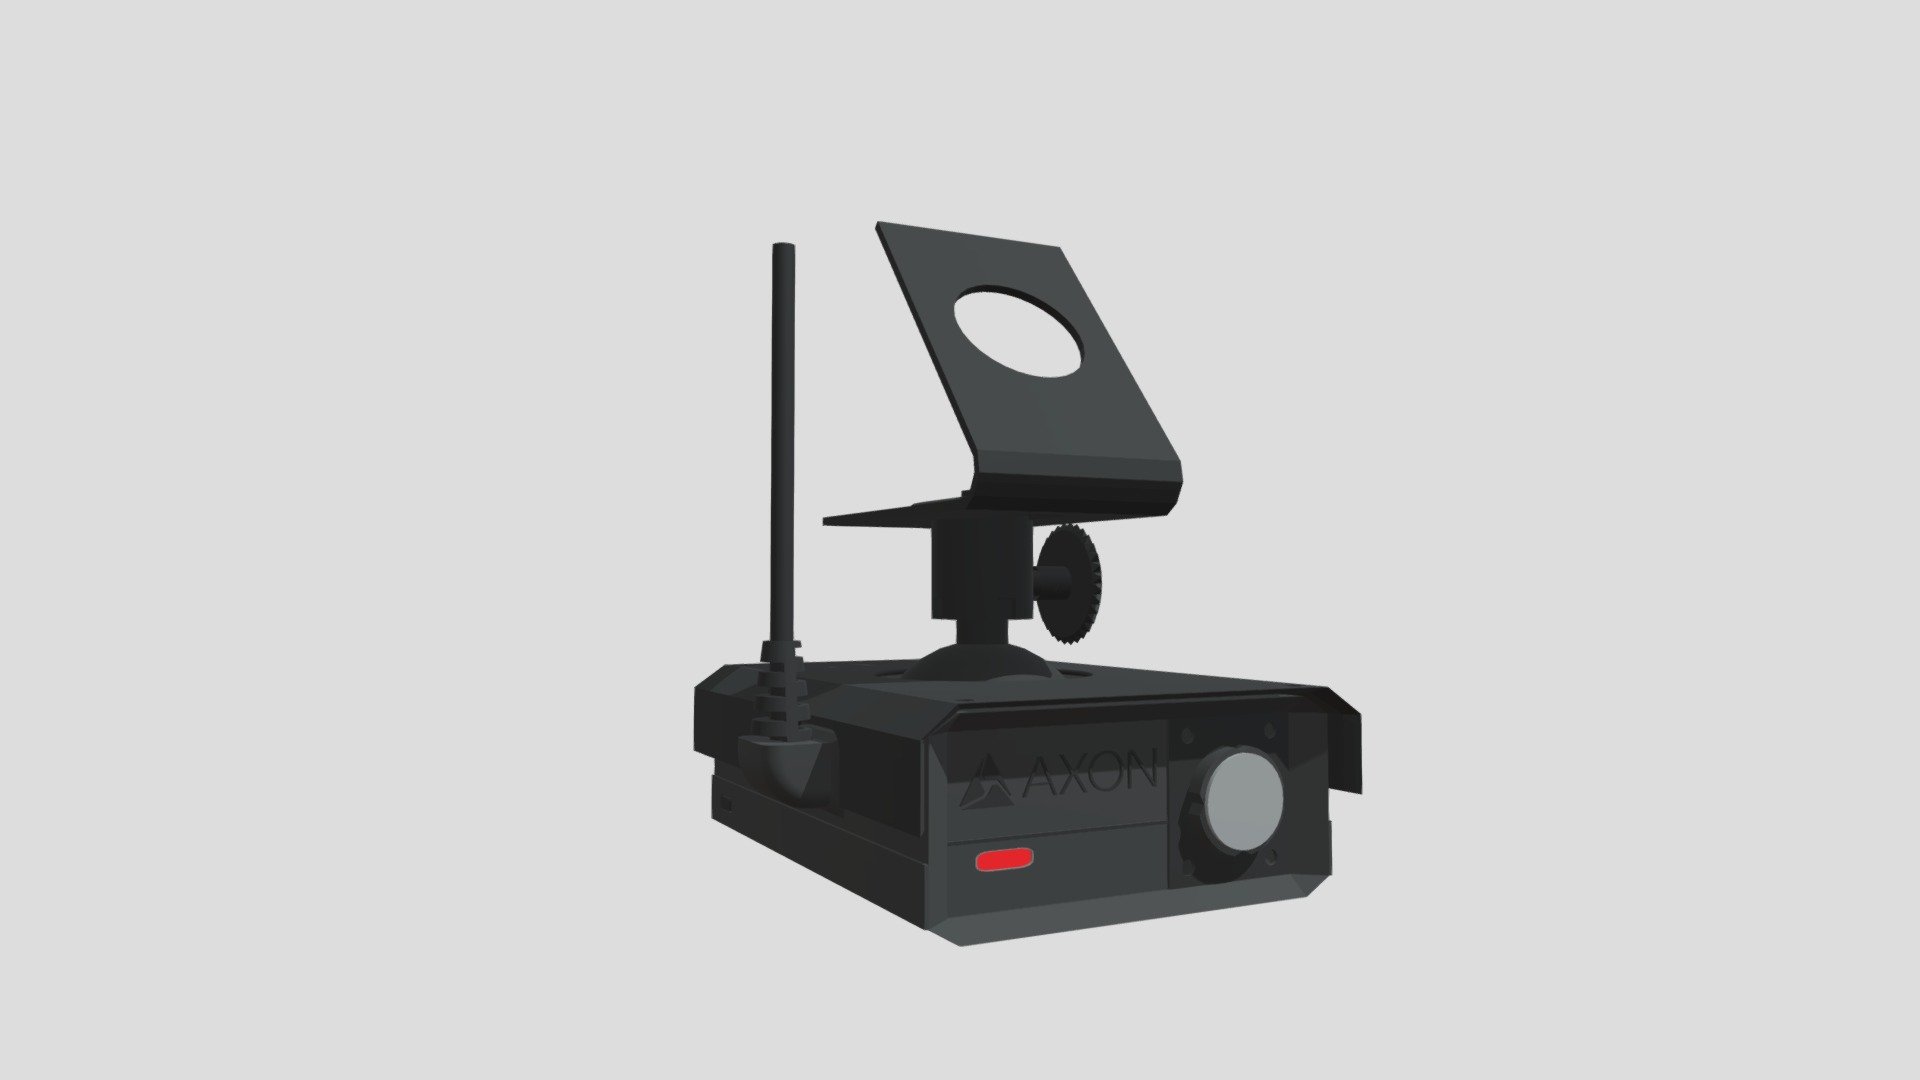 The Axon Fleet 2 is a police dashcam used in many country aroud the world.

I have completly create the model by myself - Axon Fleet 2 | Police Dashcam - 3D model by w4nou 3d model